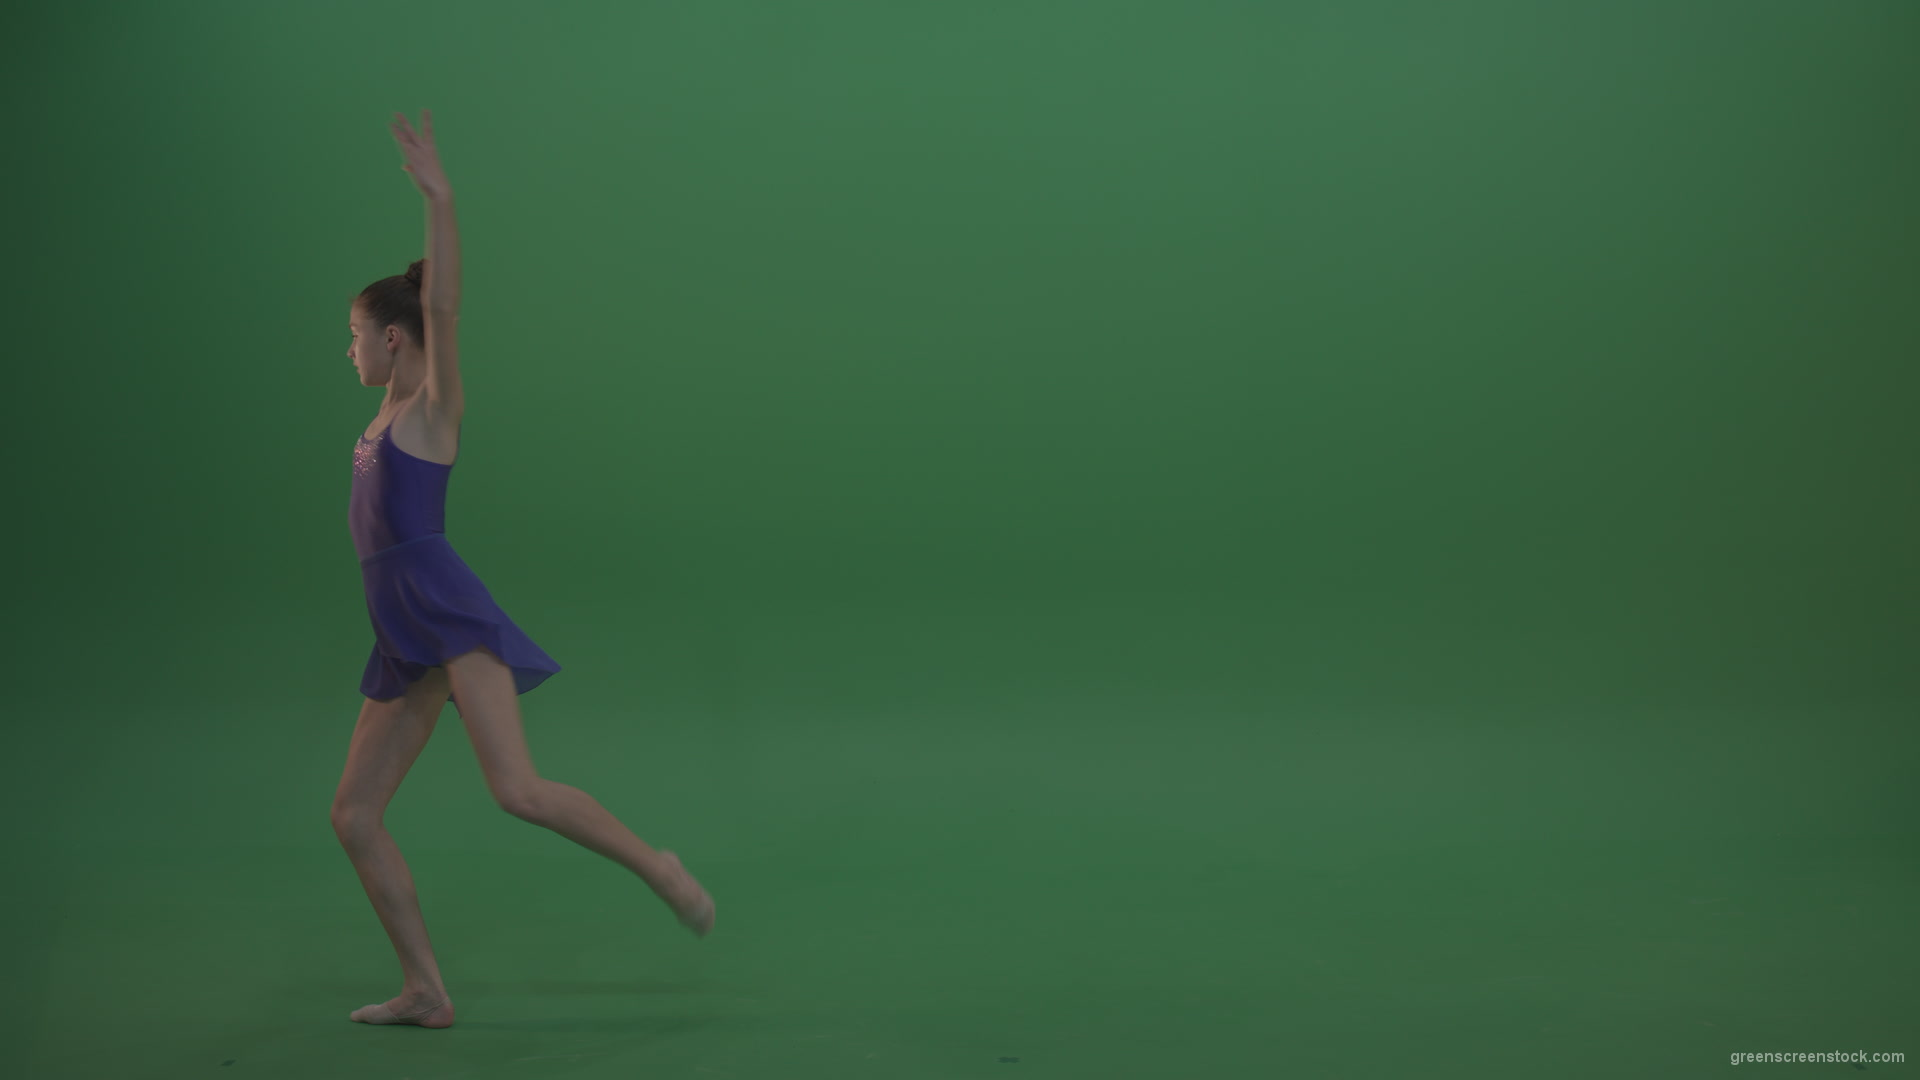 Young_Gymnast_Showing_Marvelous_Technical_Dance_Swan_Ballet_Moves_Technical_Performance_Of_Rhythmic_Artistic_Gymnastics_On_Green_Screen_Wall_Background_005 Green Screen Stock